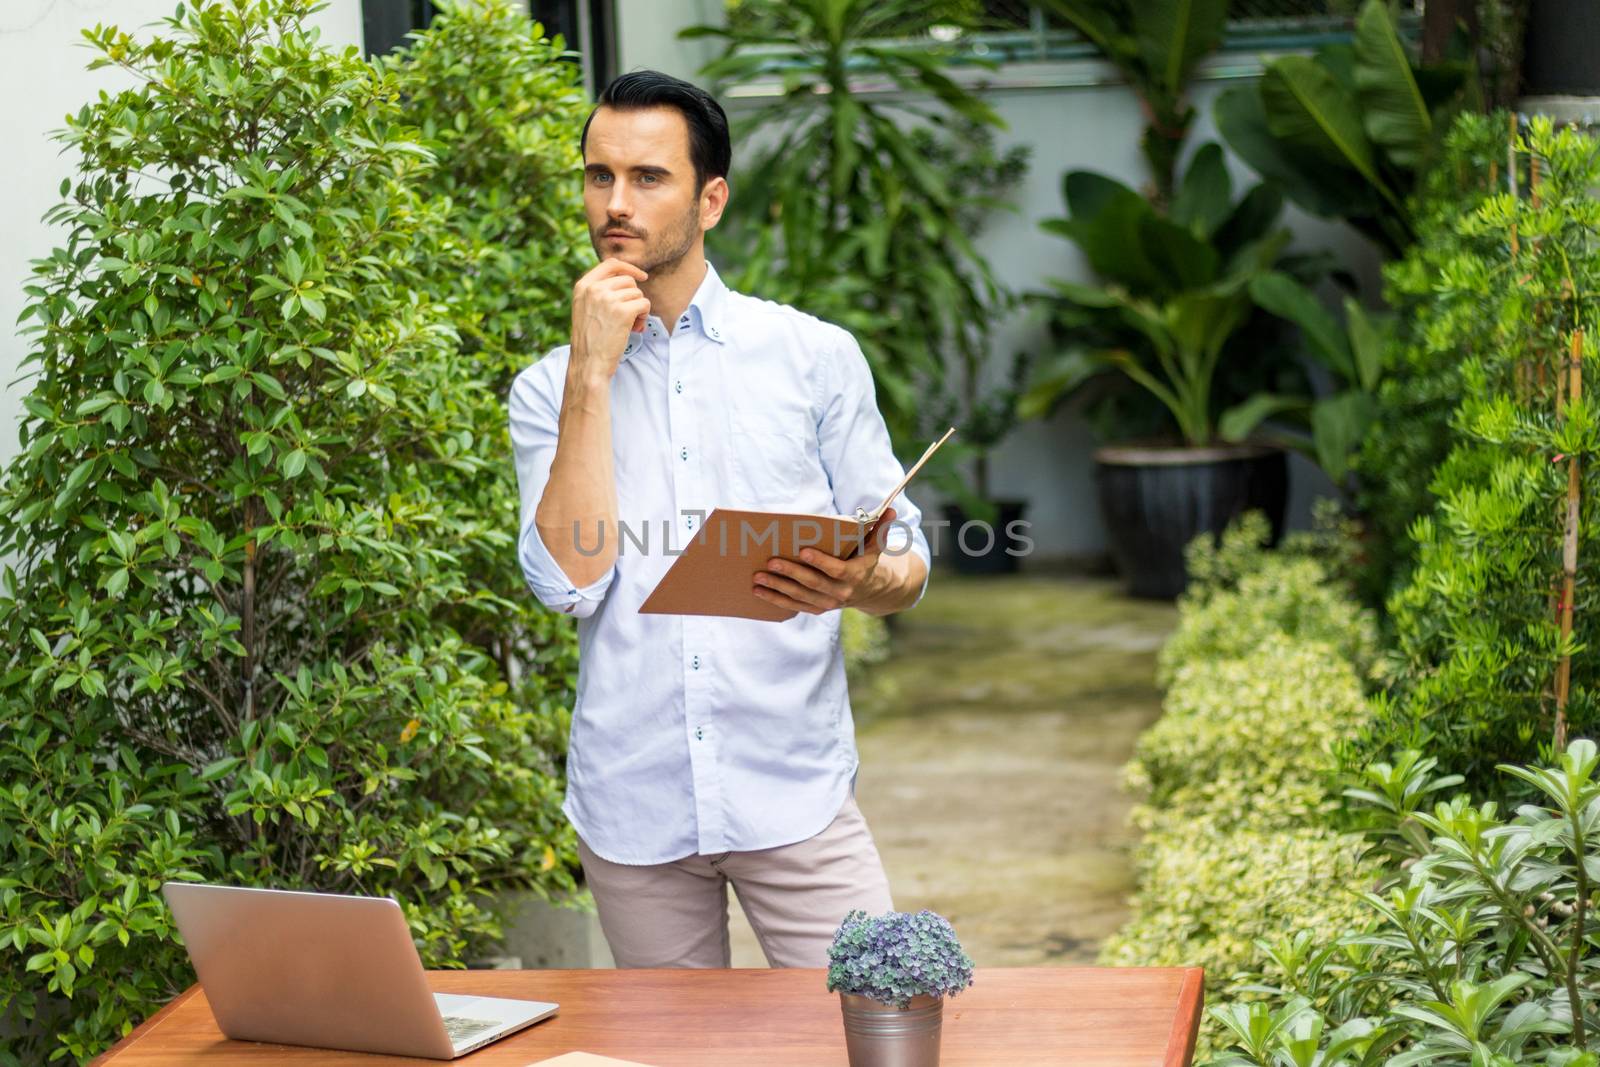 A young man stands reading a book in the garden. There's a notebook on the table to use information and work.